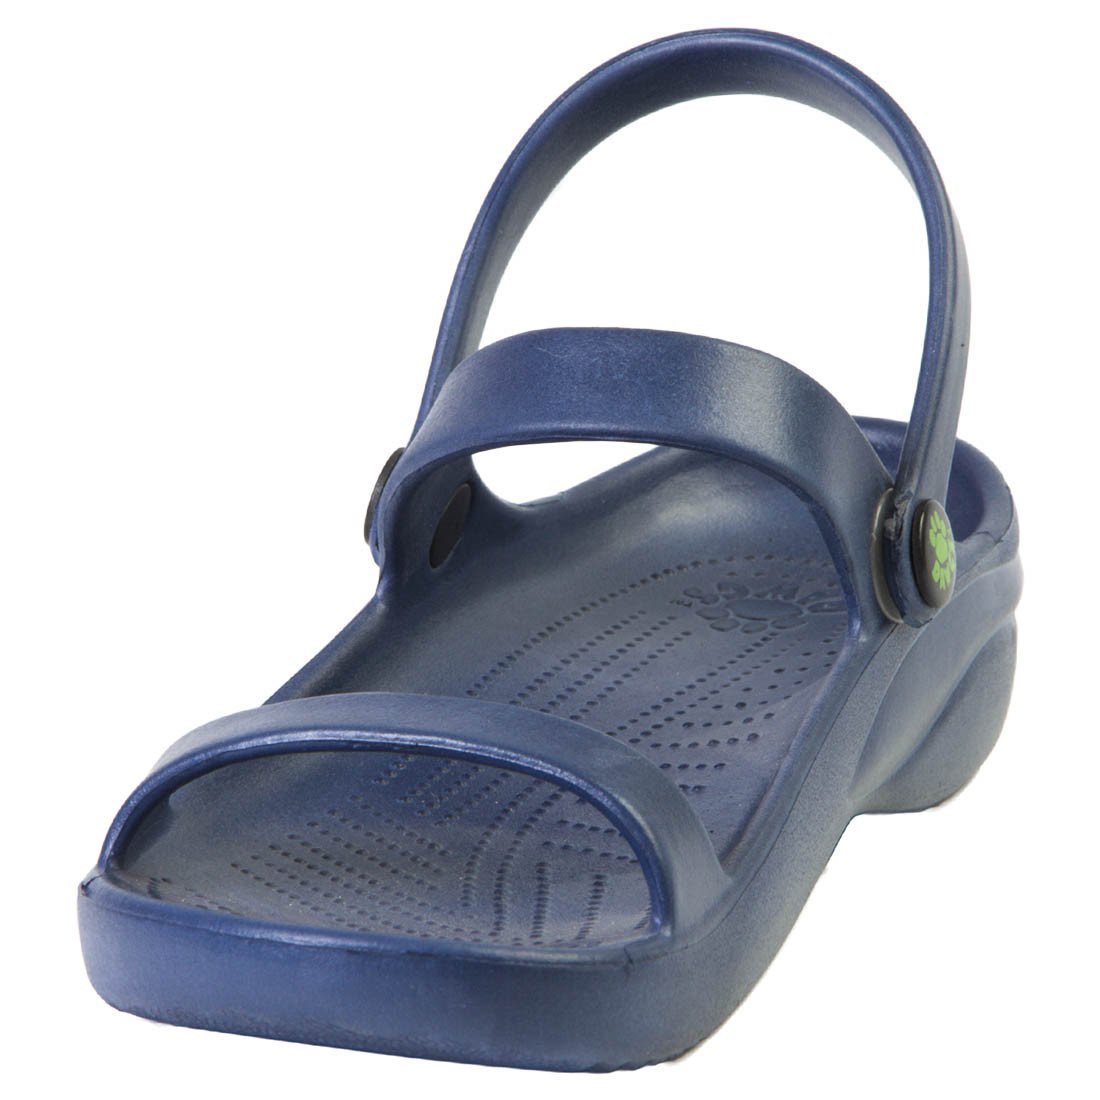 Women's 3-Strap Sandals - Navy by DAWGS USA